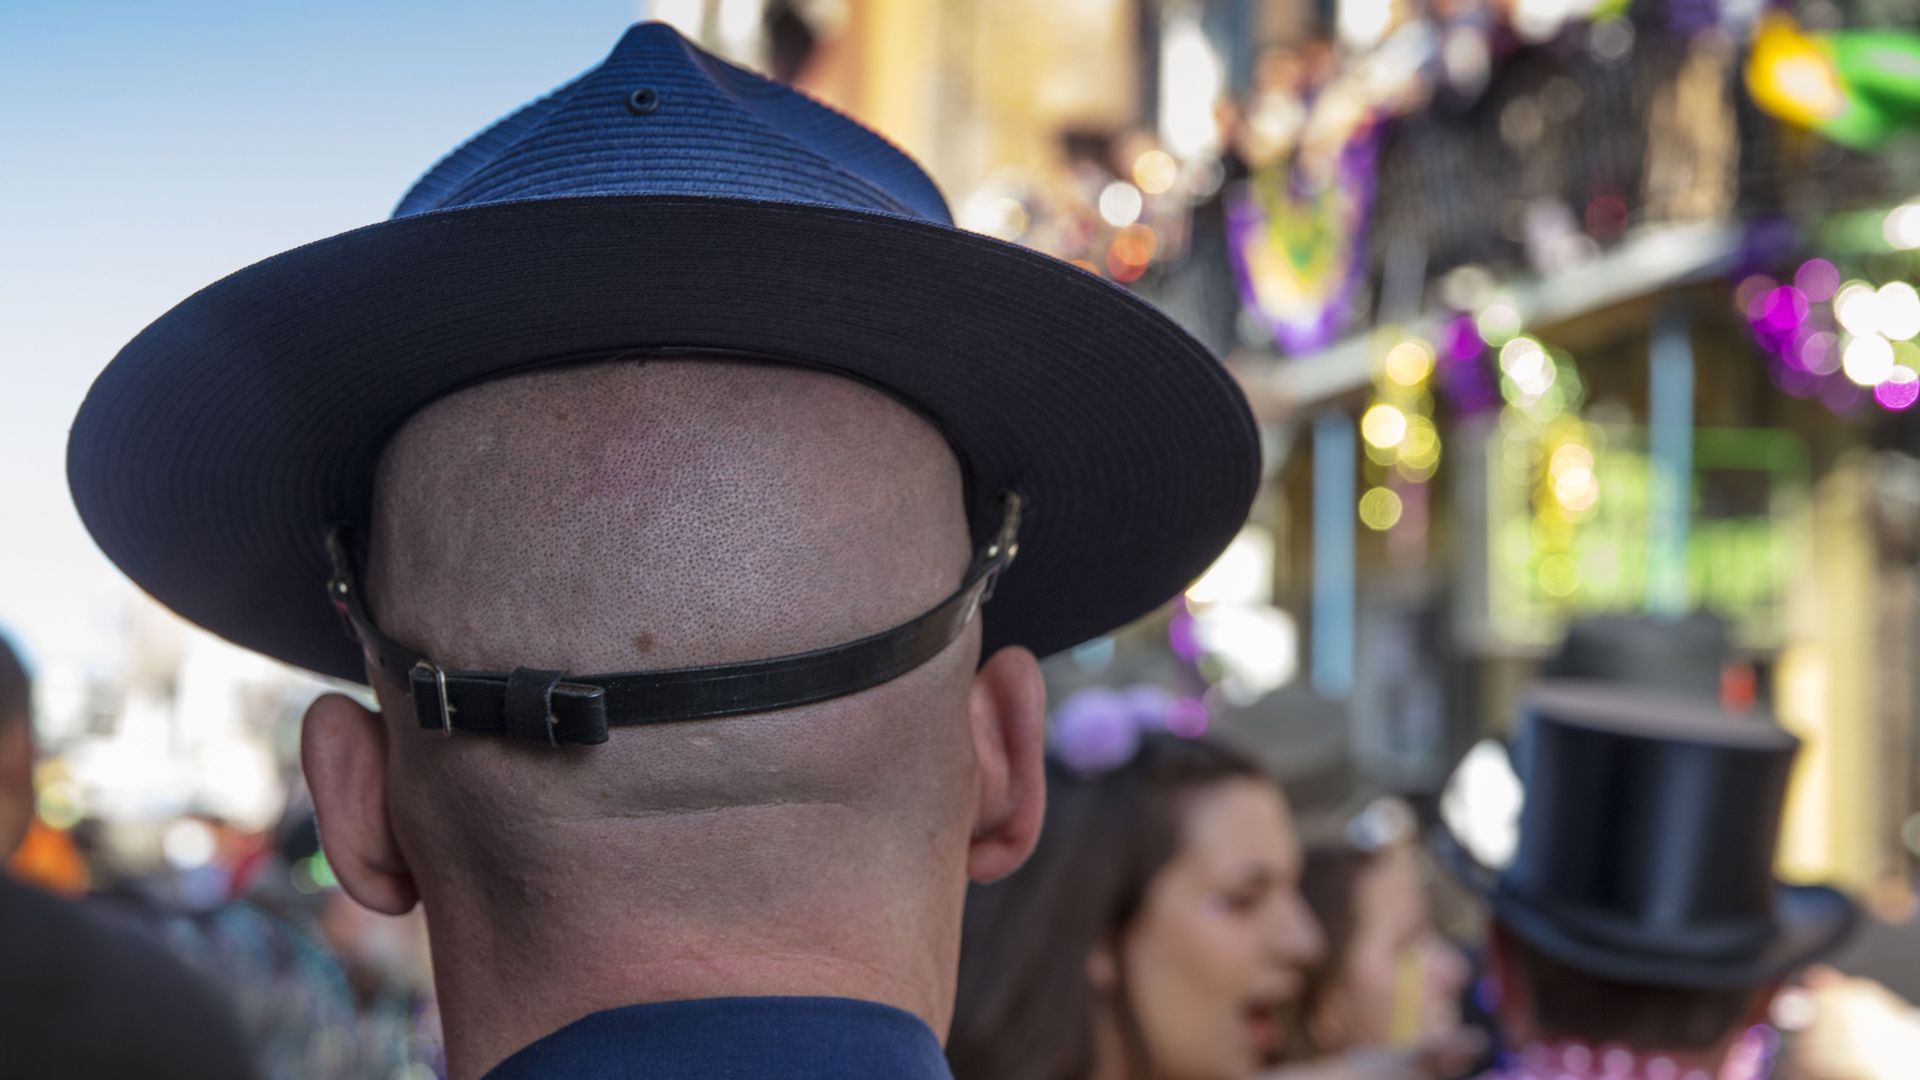 Photo shows a man with a Louisiana State Police hat on in the French Quarter